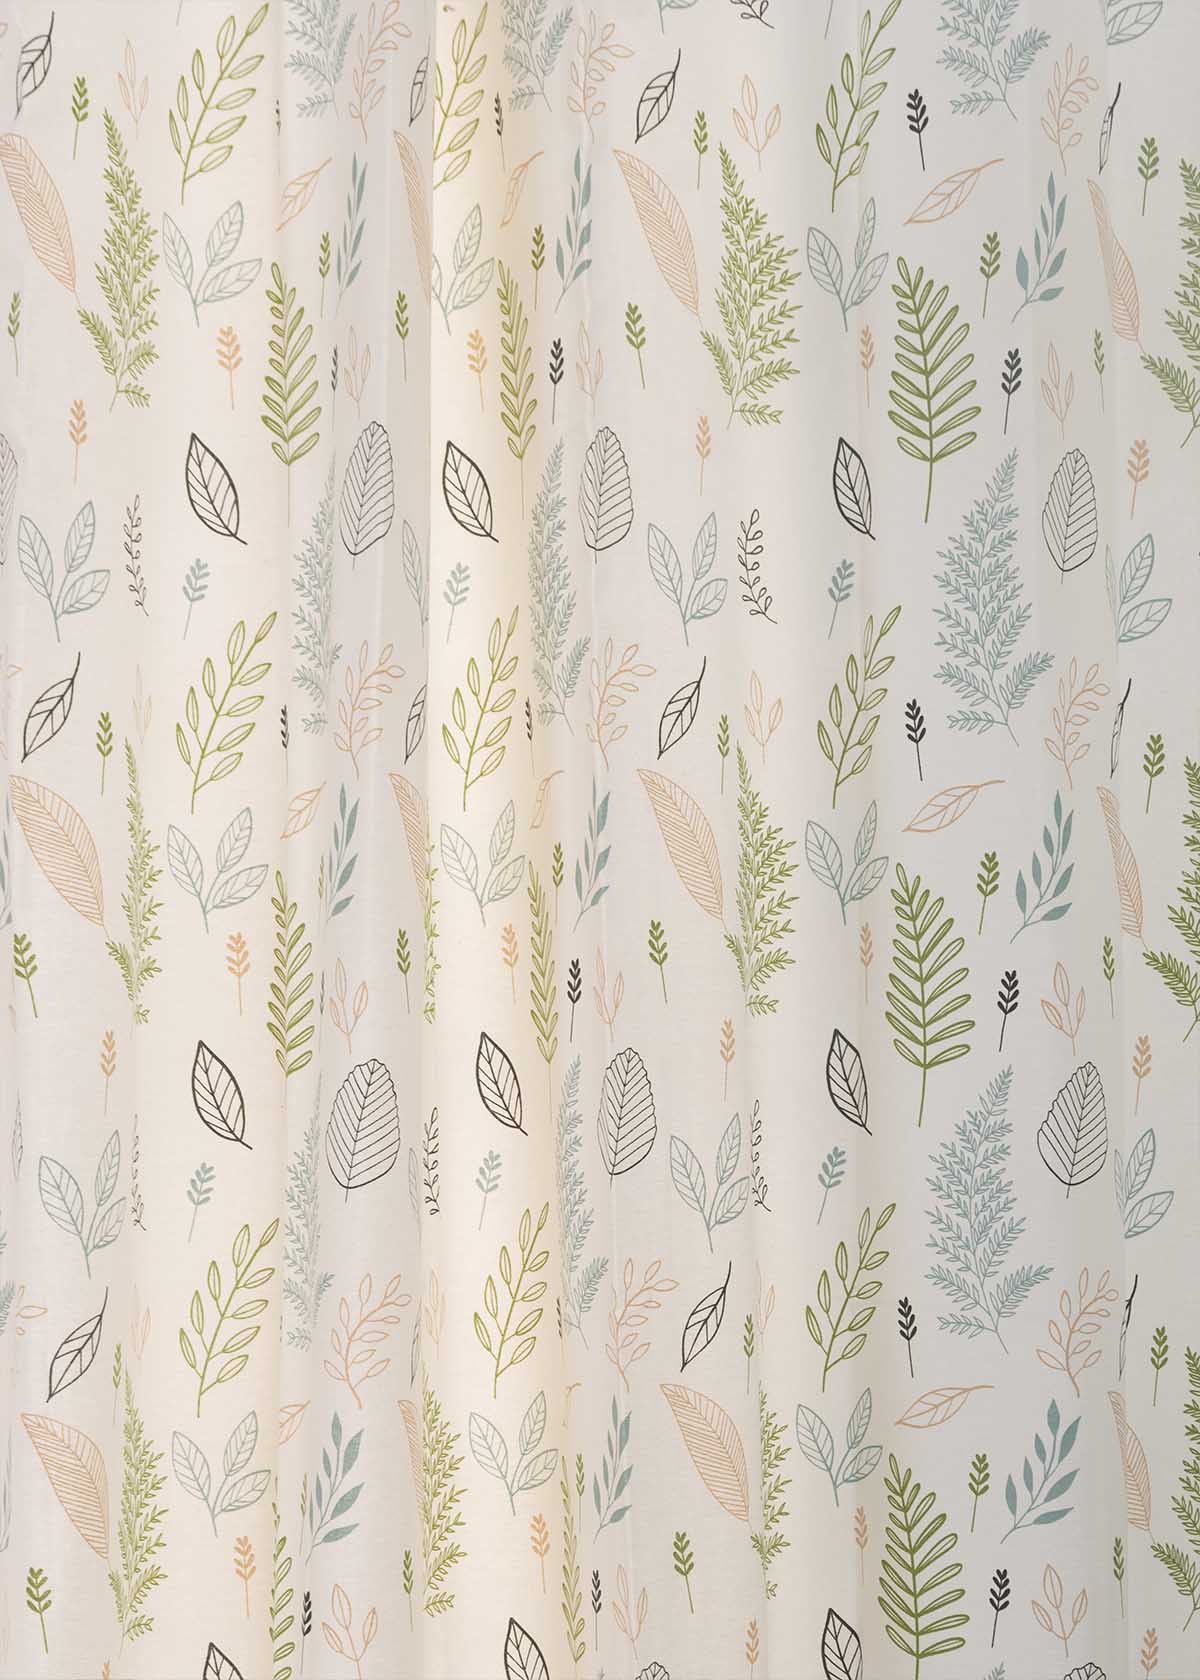 Rustling Leaves printed cotton Fabric - Green